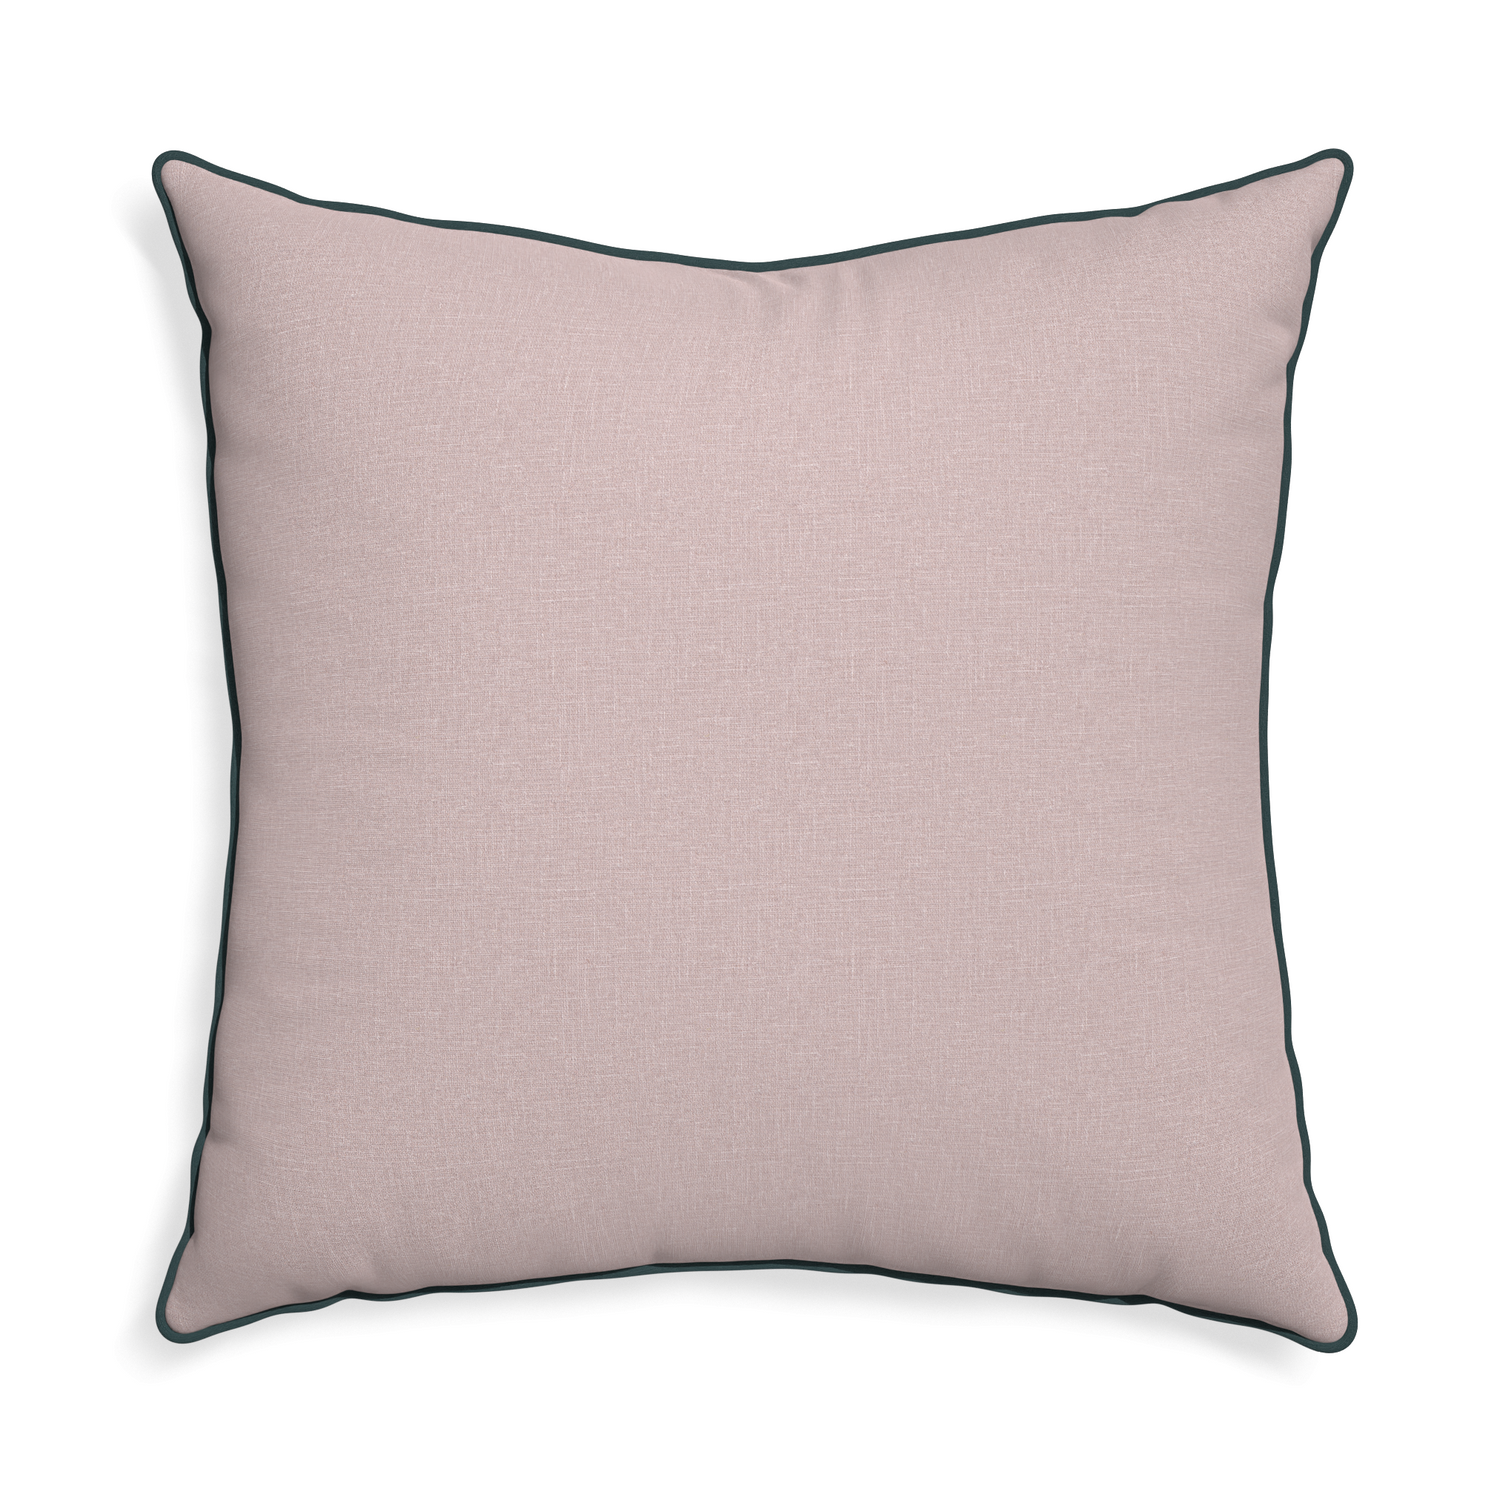 Euro-sham orchid custom mauve pinkpillow with p piping on white background